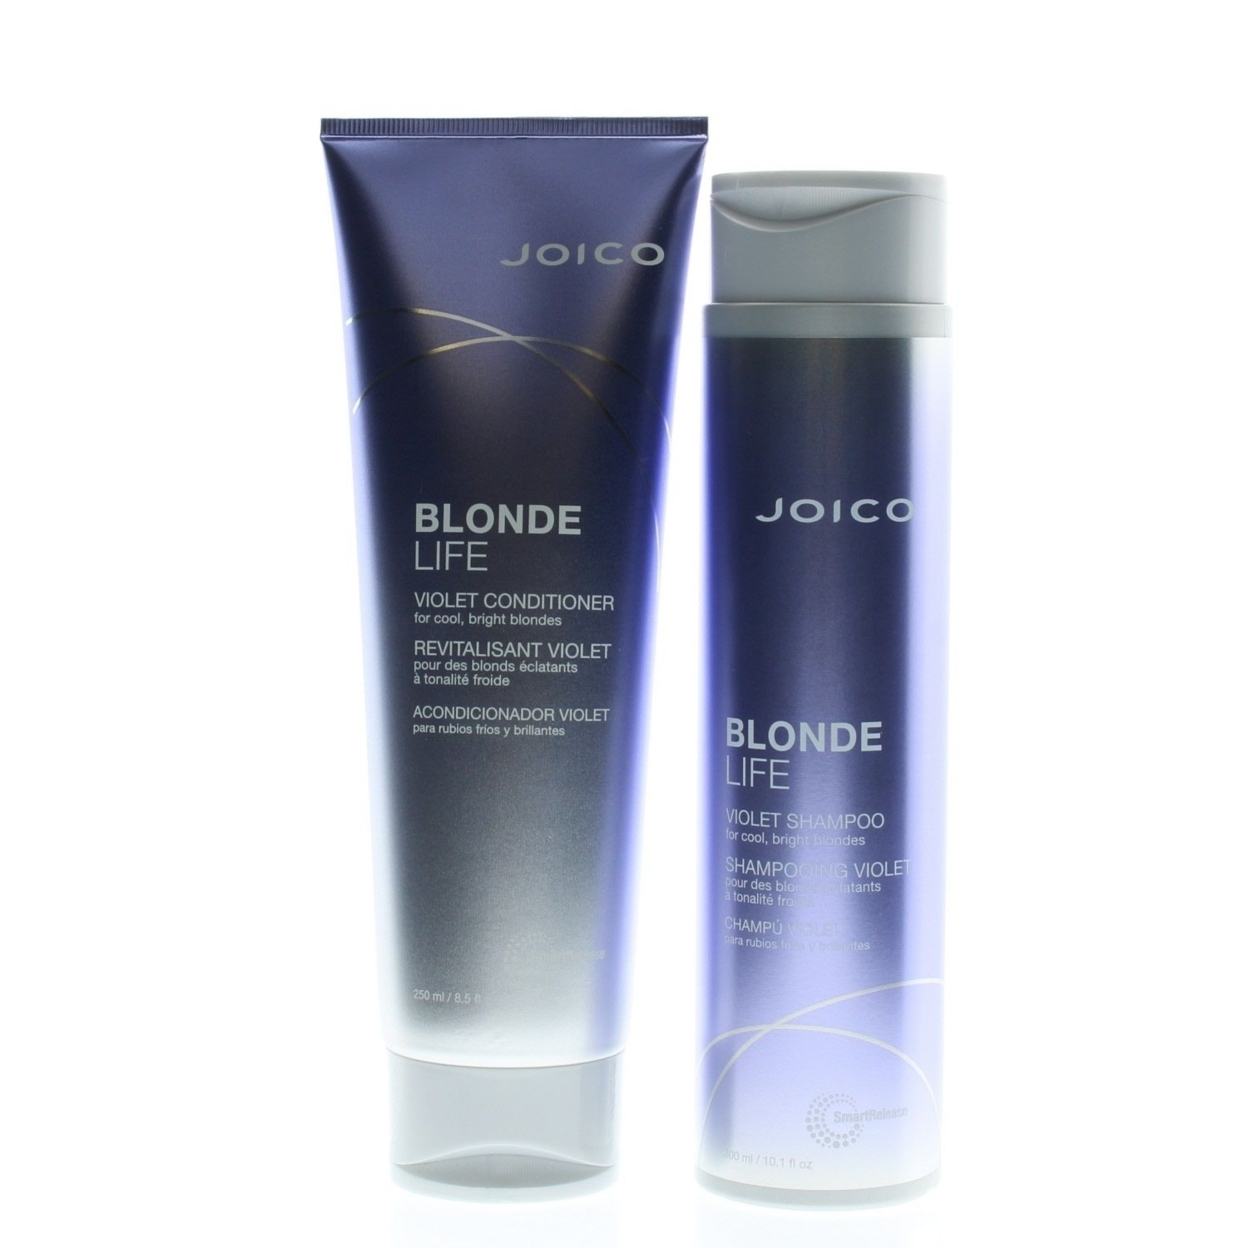 Joico Blonde Life Violet Shampoo 10.1oz And Conditioner 8.5oz Combo